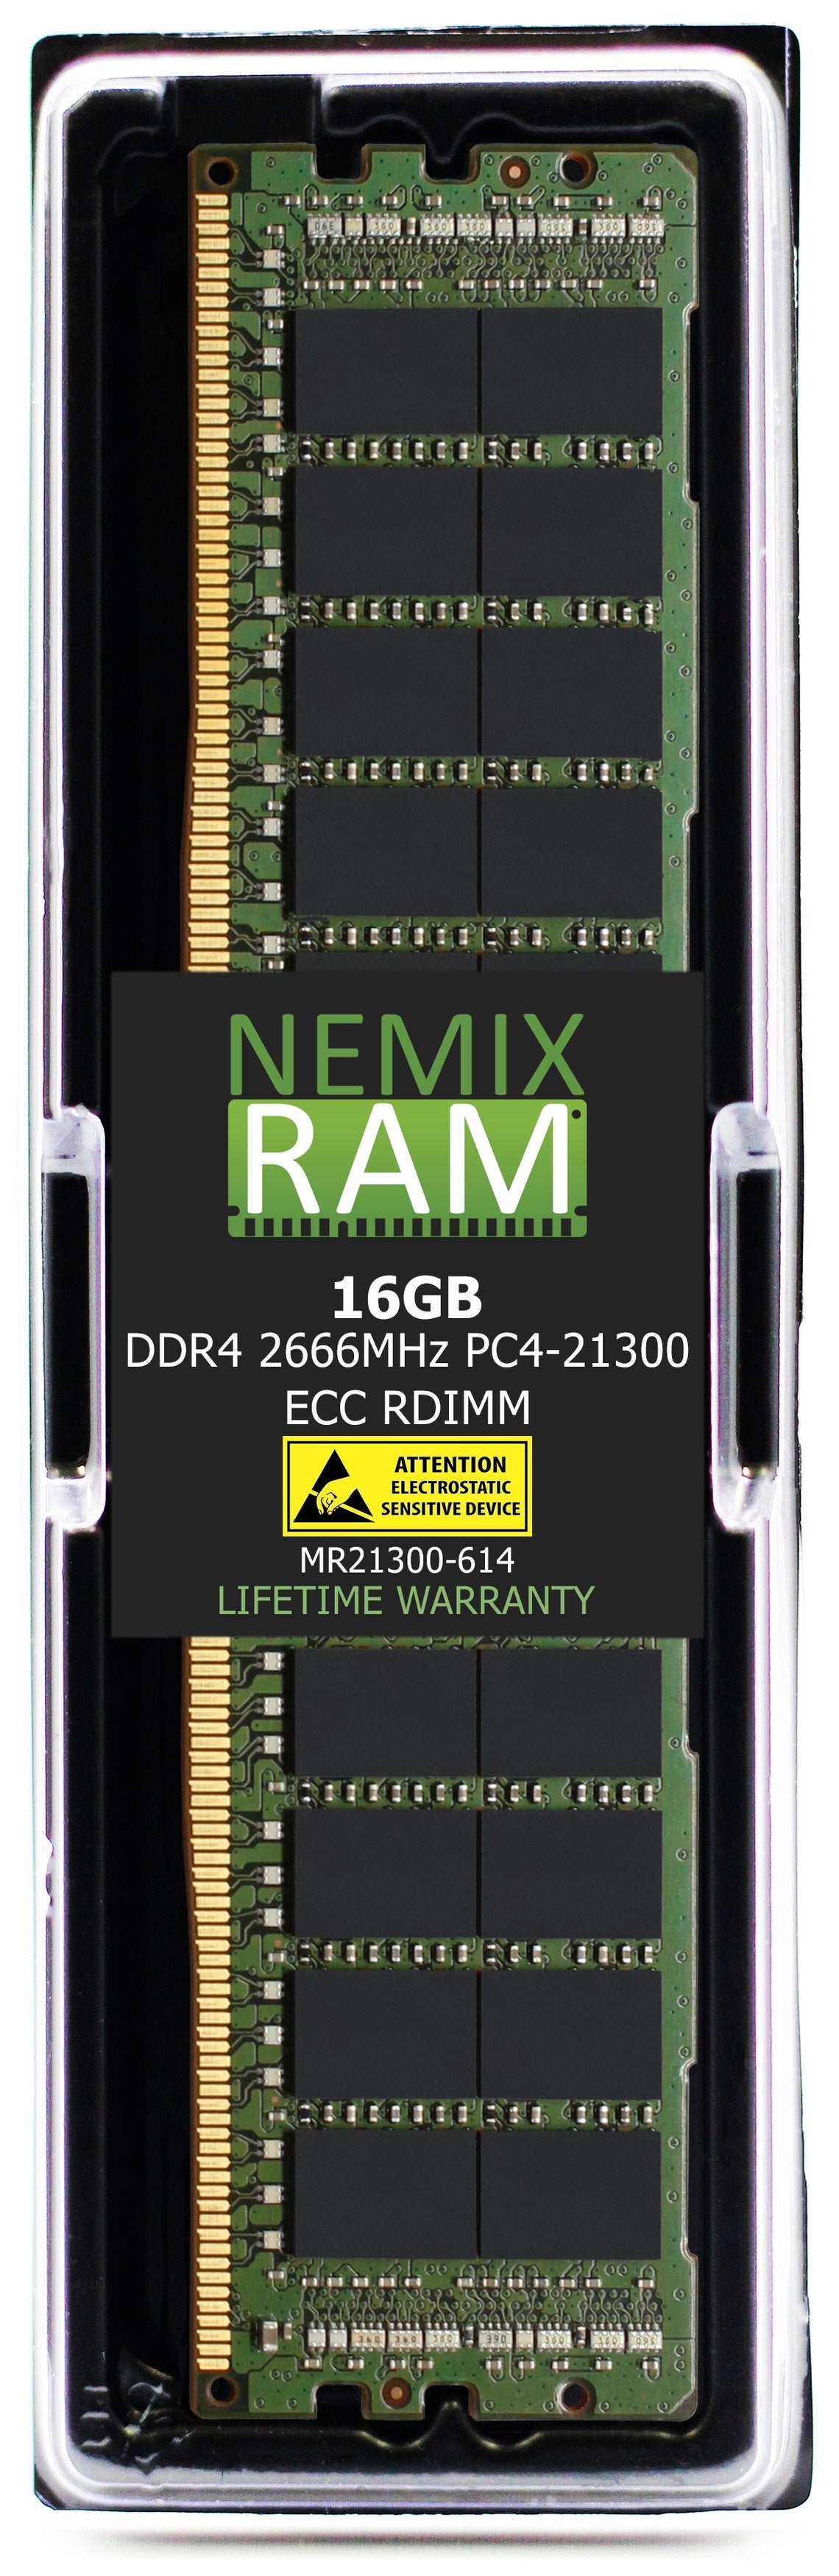 DDR4 2666MHZ PC4-21300 RDIMM Compatible with Synology FlashStation FS3400